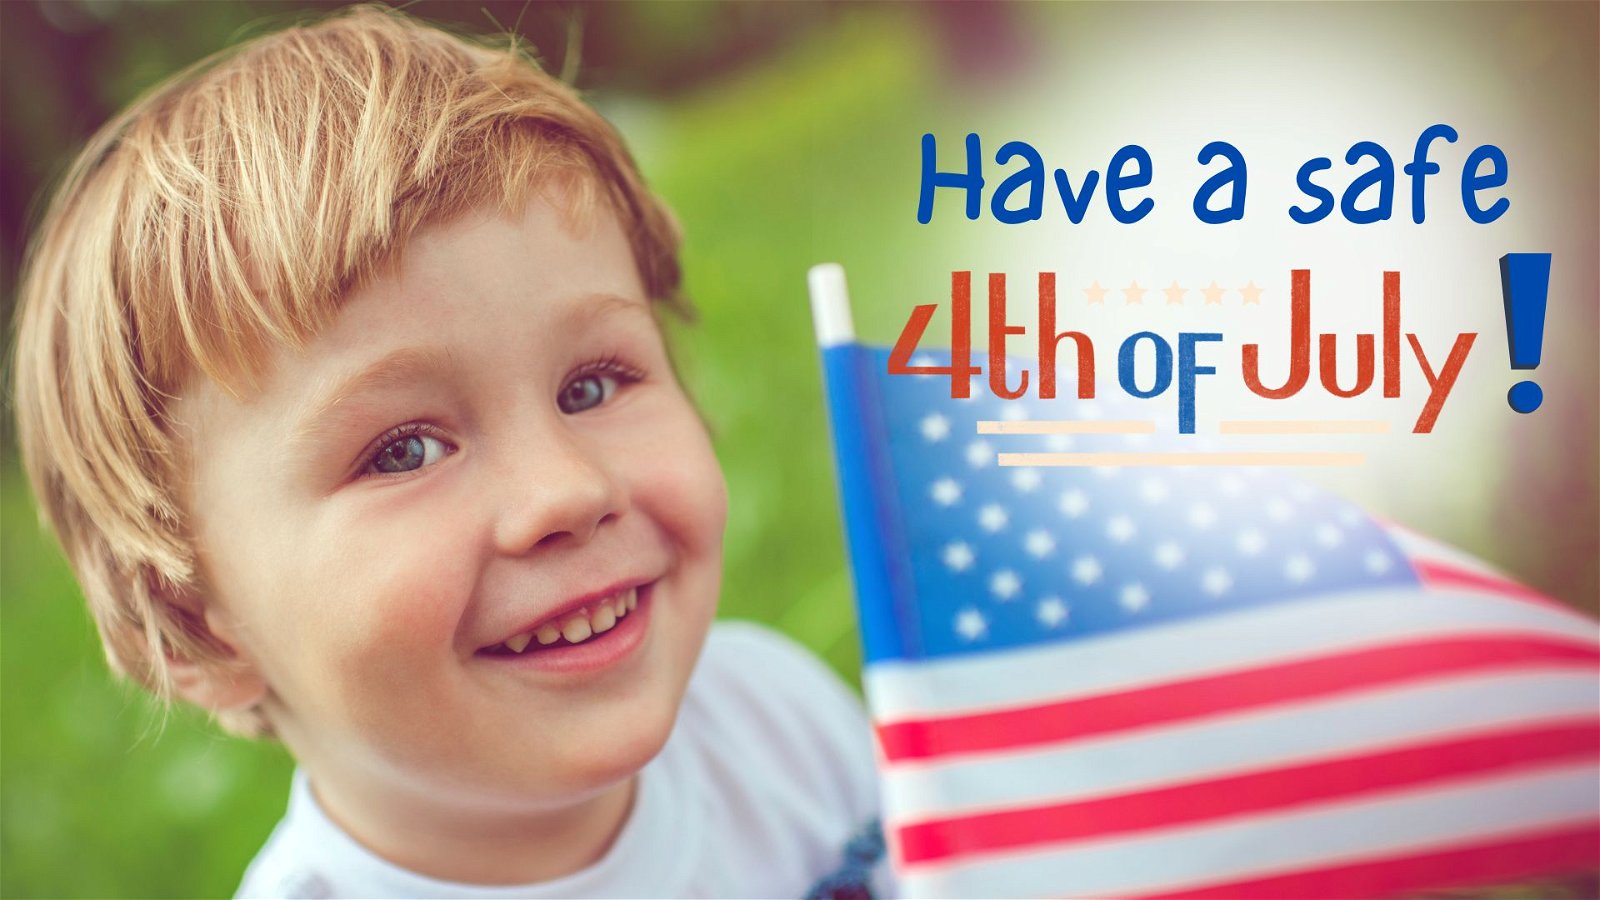 Tips to safely celebrate Fourth of July with kids